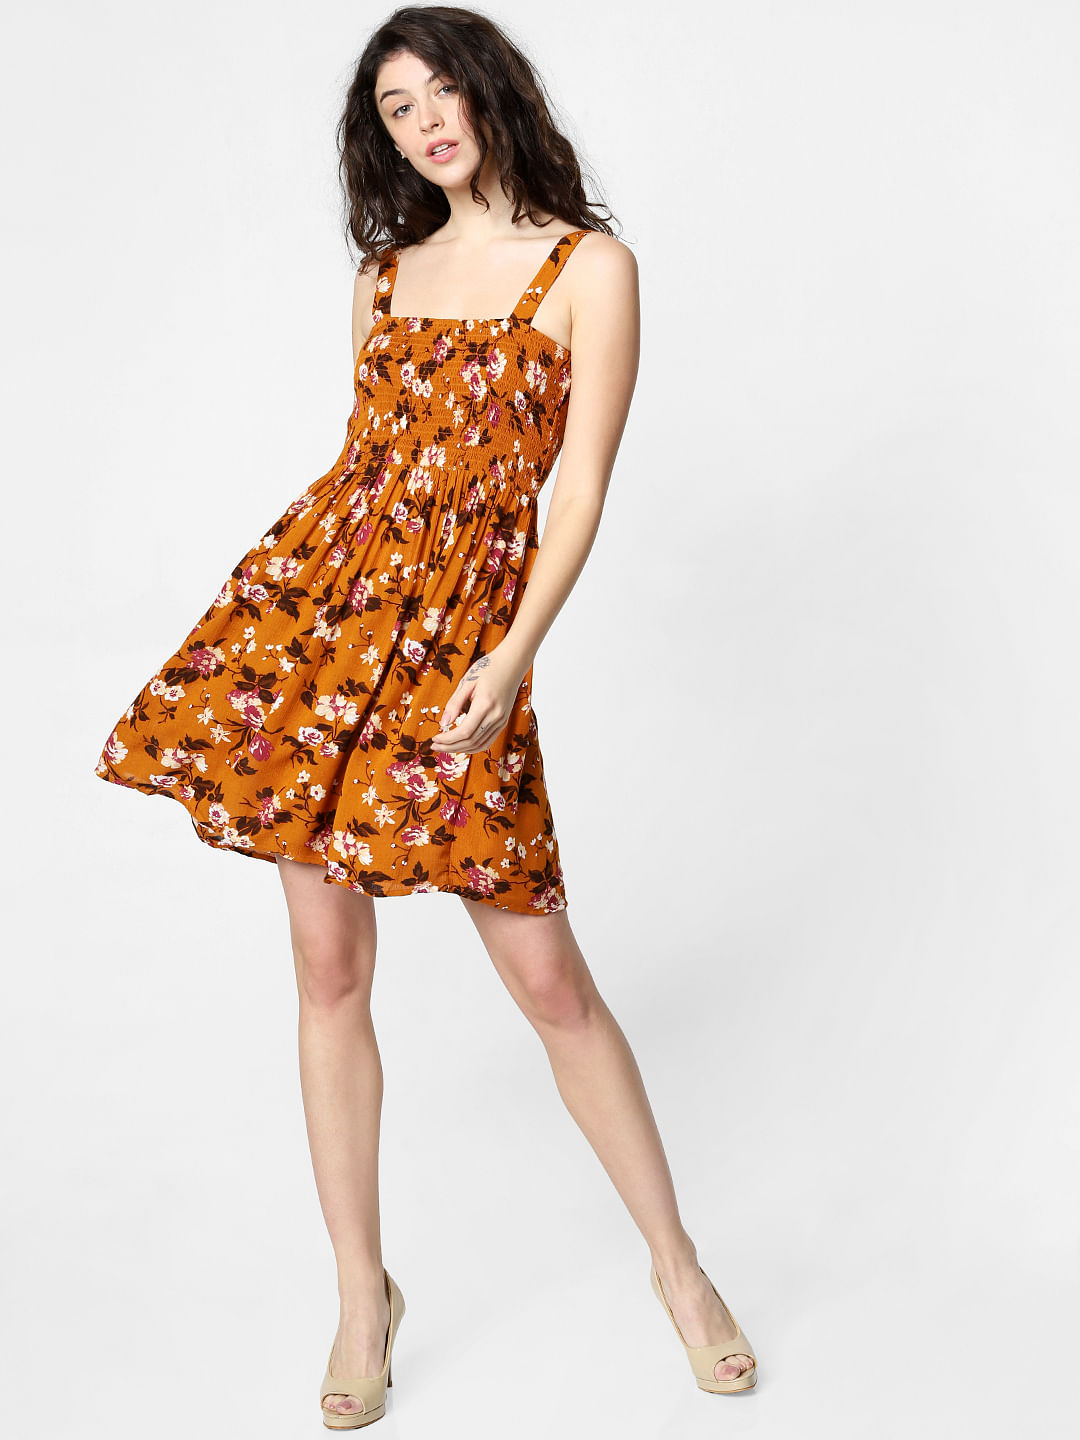 Orange Fit and Flare Summer Dress for Women